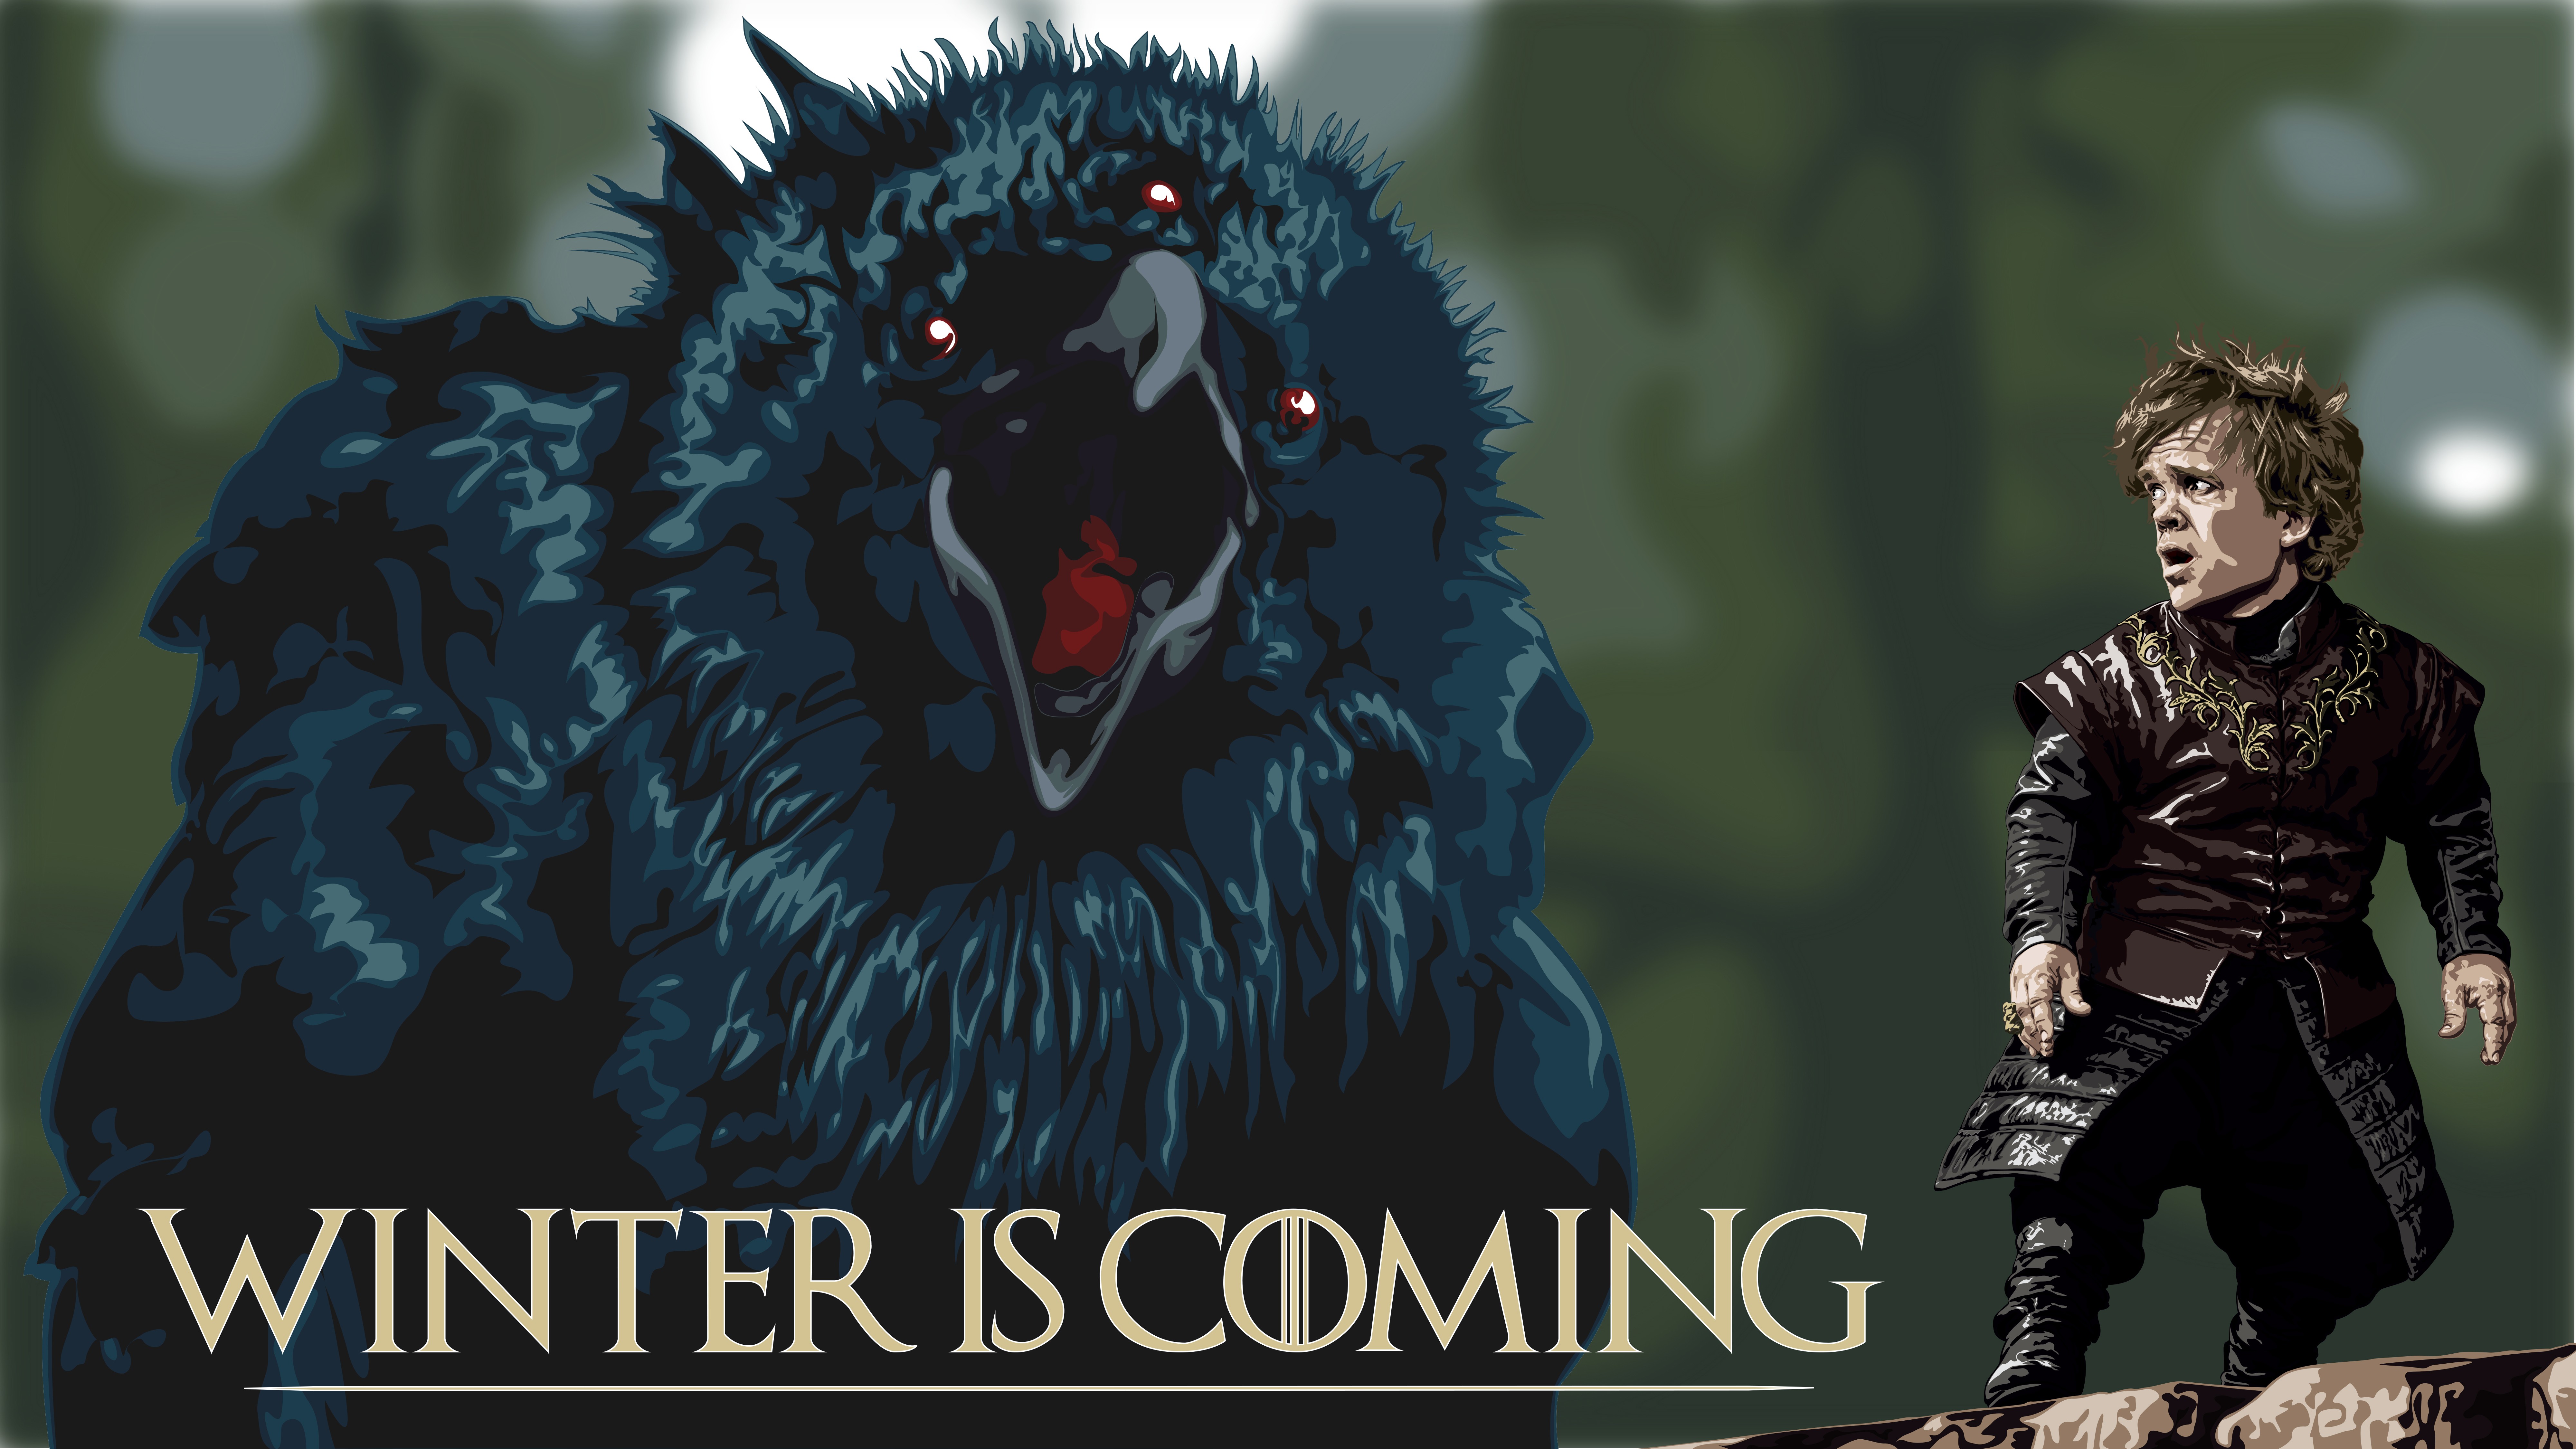 Game Of Thrones, Winter Is Coming, Crow, Three Eyed Crow, Tyrion Lannister Wallpaper